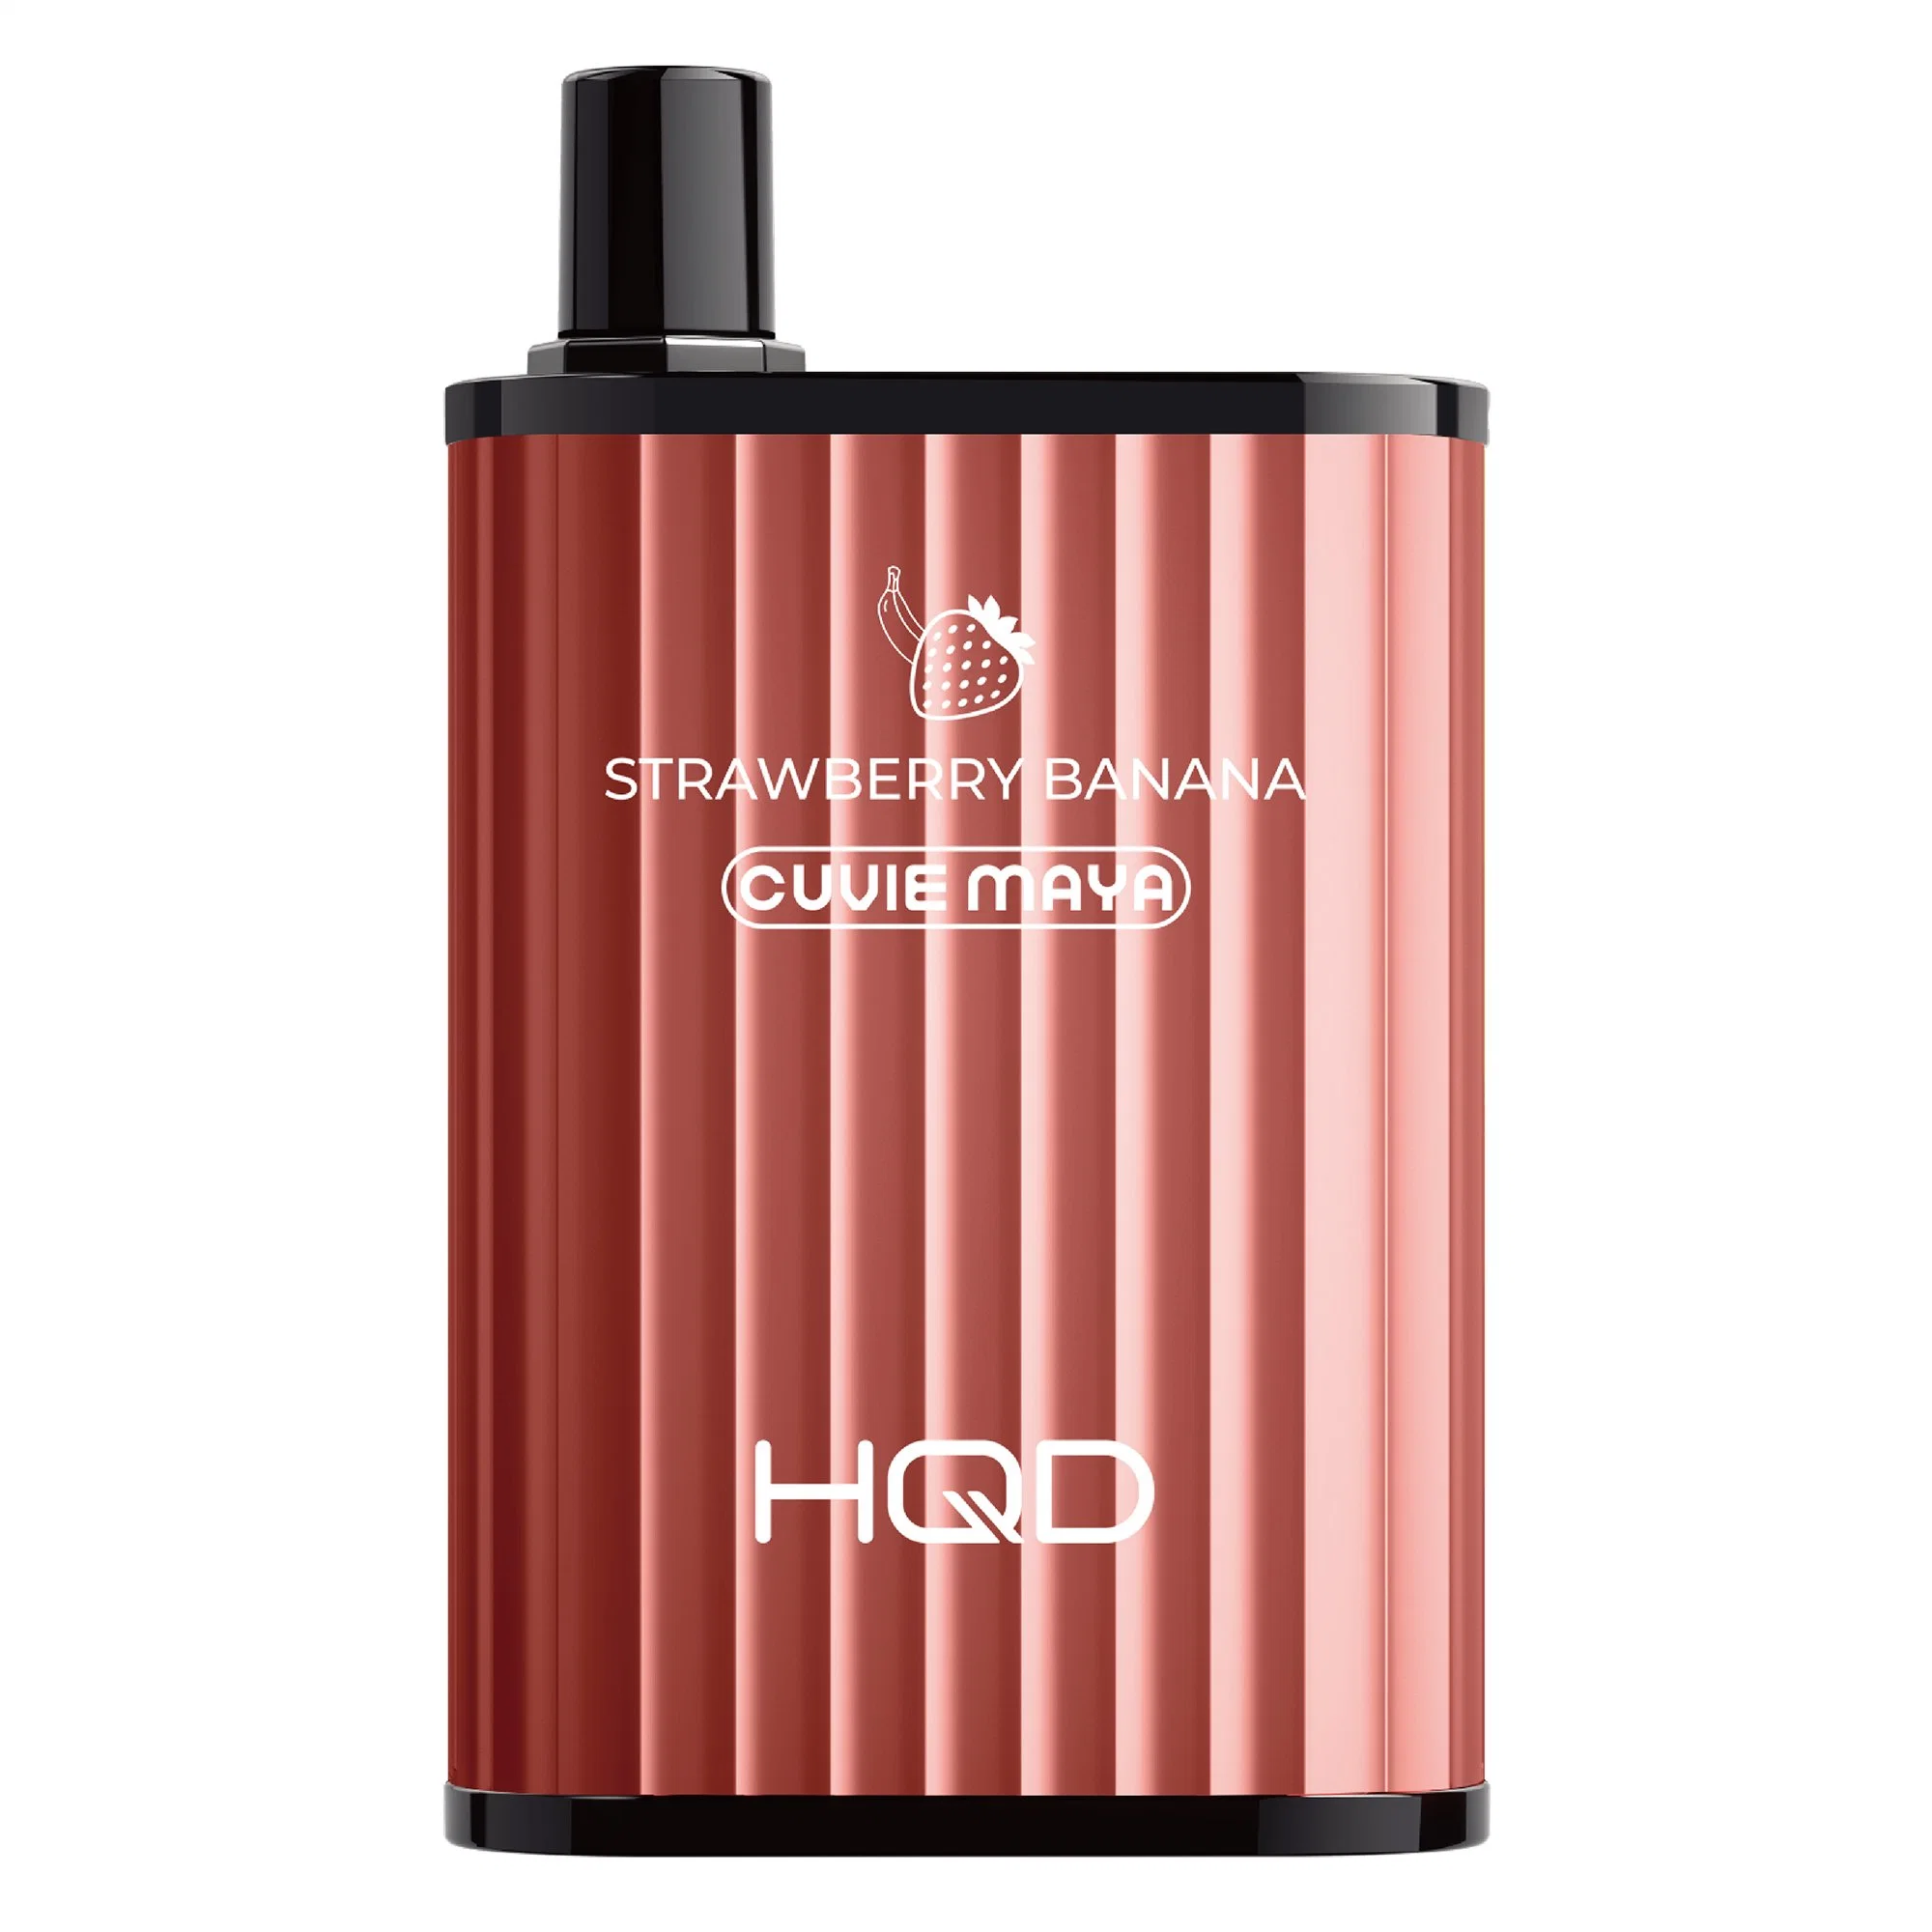 Hqd 6, 000 Puffs Cuvie Maya Disposable Vape with Strawberry Banana Flavors